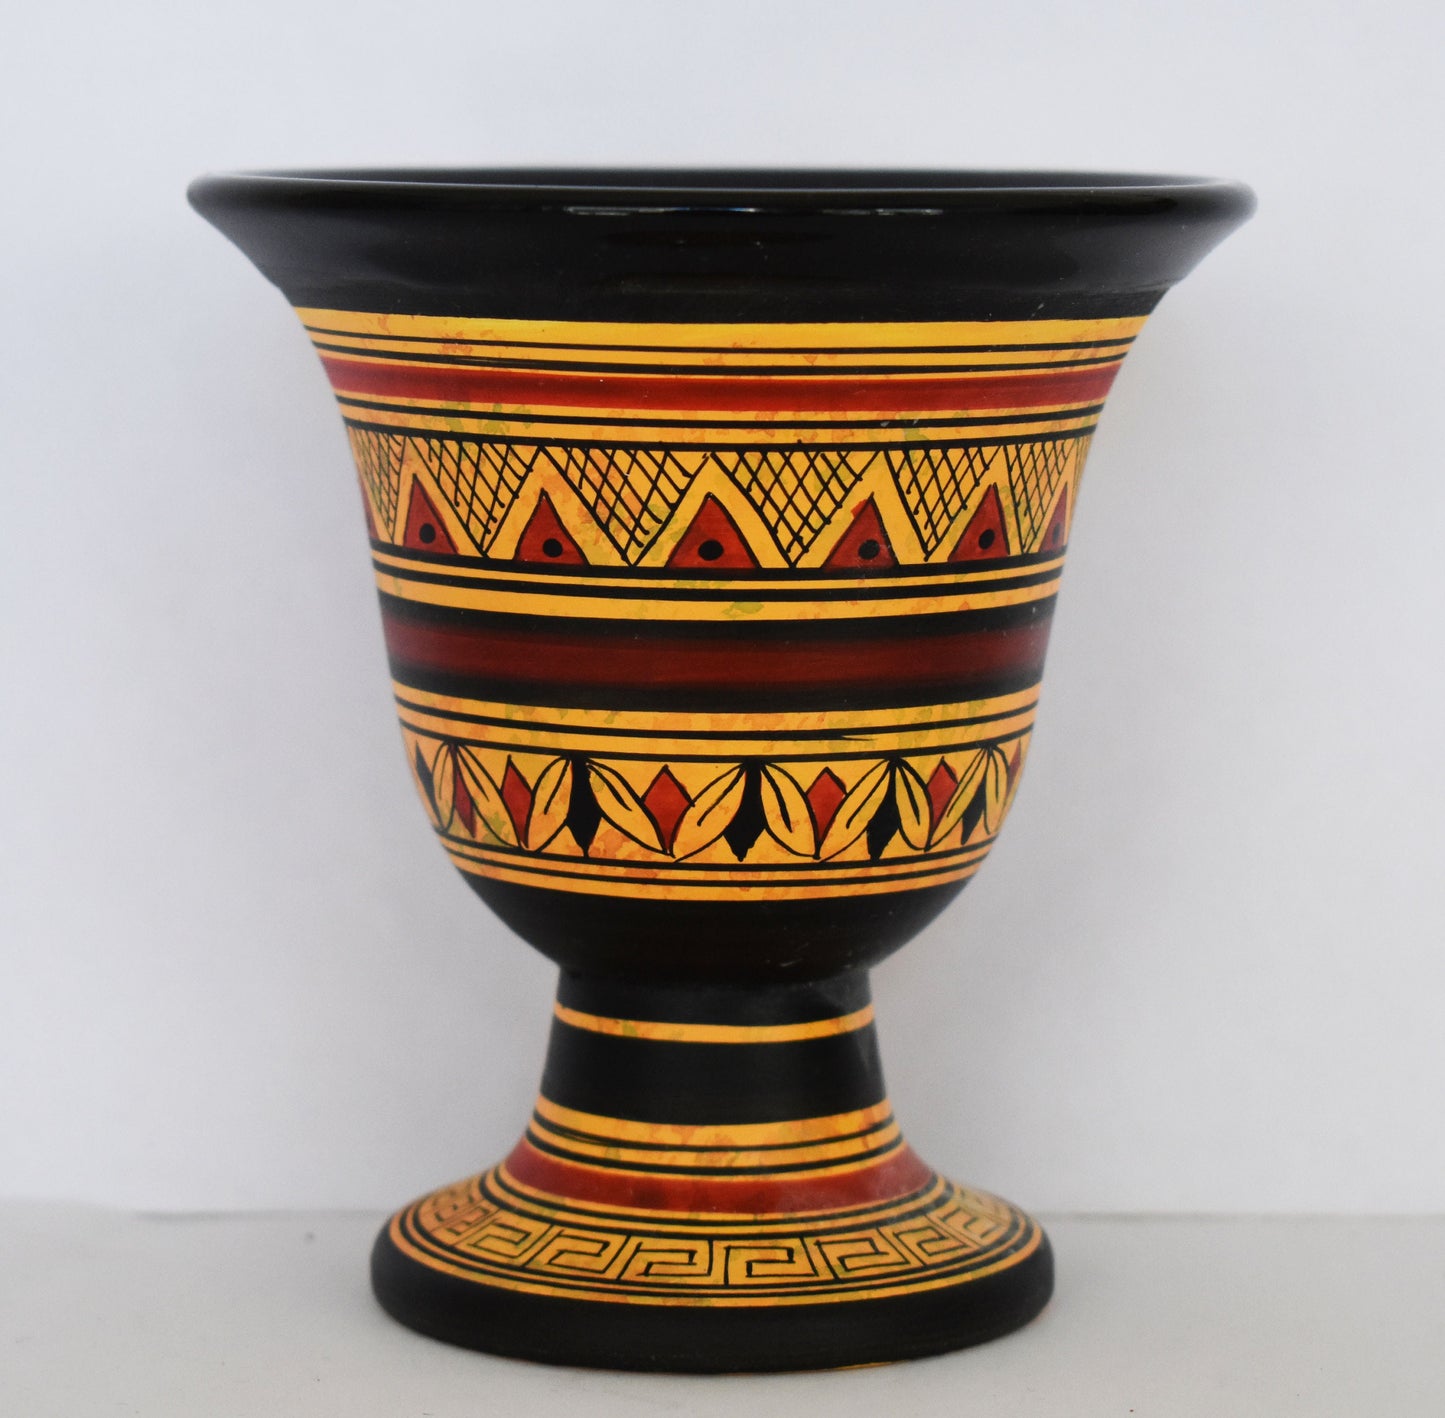 Pythagoras Cup - Fair Cup, Cup of Justice - Eternity Motif - Athens - Geometric Period - 700 BC  - Ceramic  - Handmade in Greece